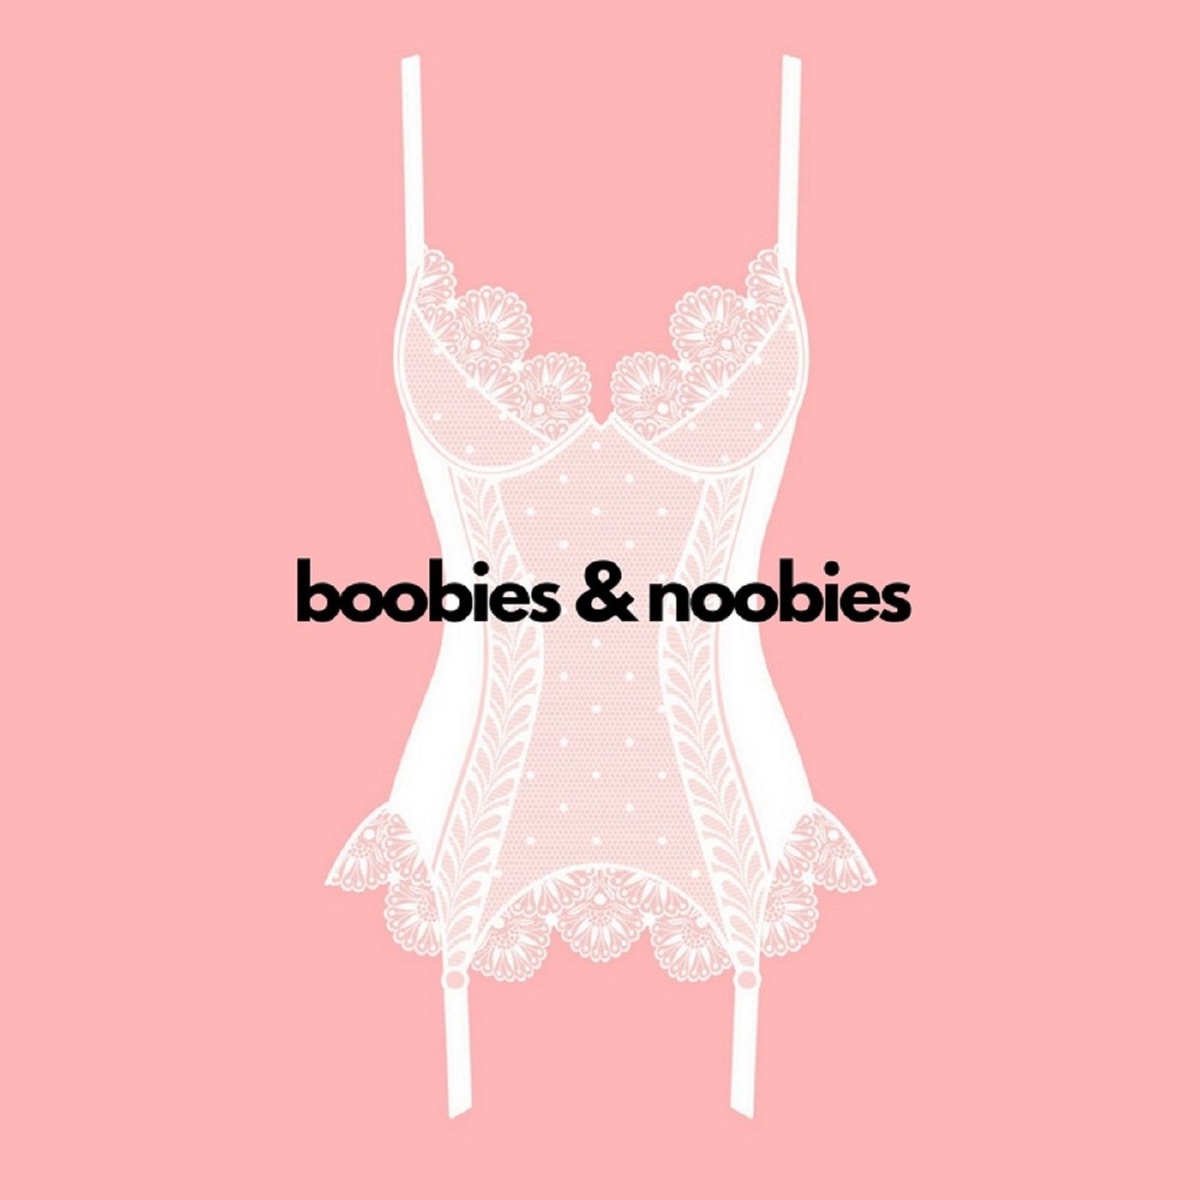 Rose Kelly Patreon Youtuber Mom - Boobies & Noobies: A Romance Review Podcast â€“ Podcast â€“ Podtail